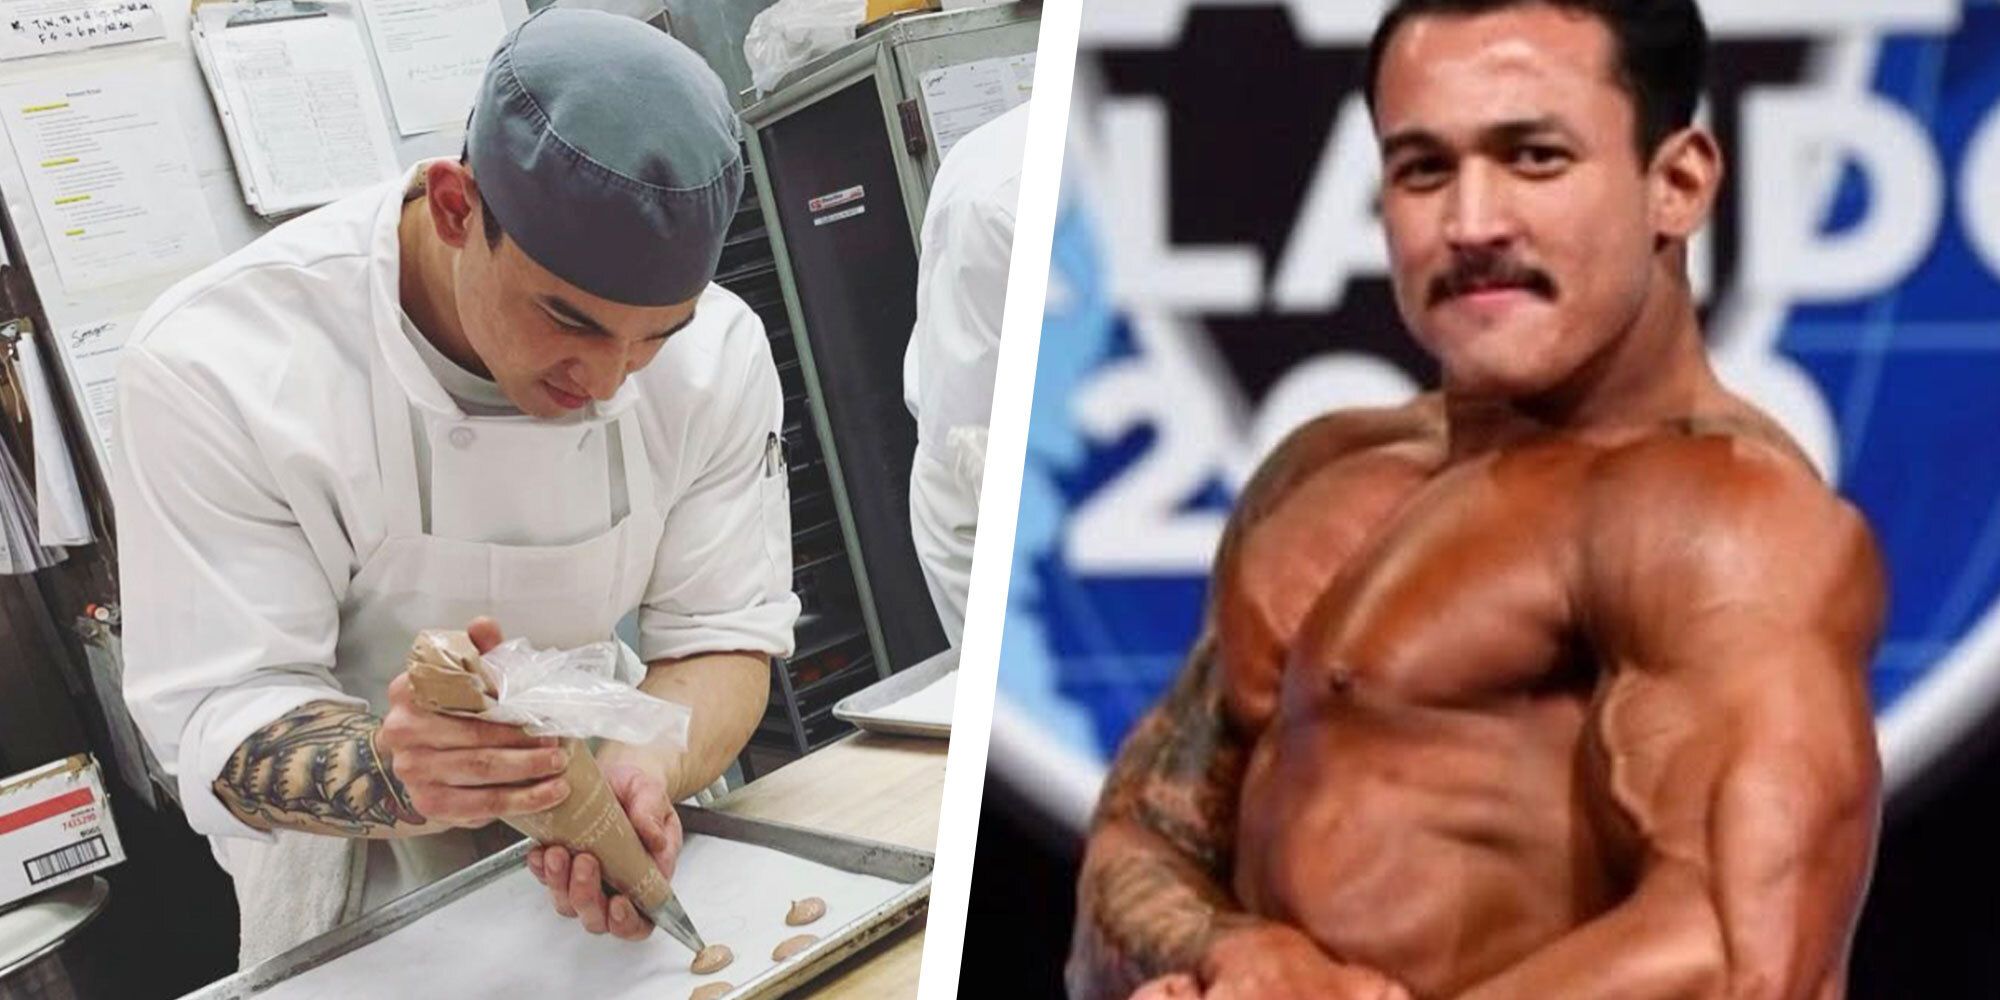 Heres How a Pastry Chef Stays Shredded While Surrounded by Treats